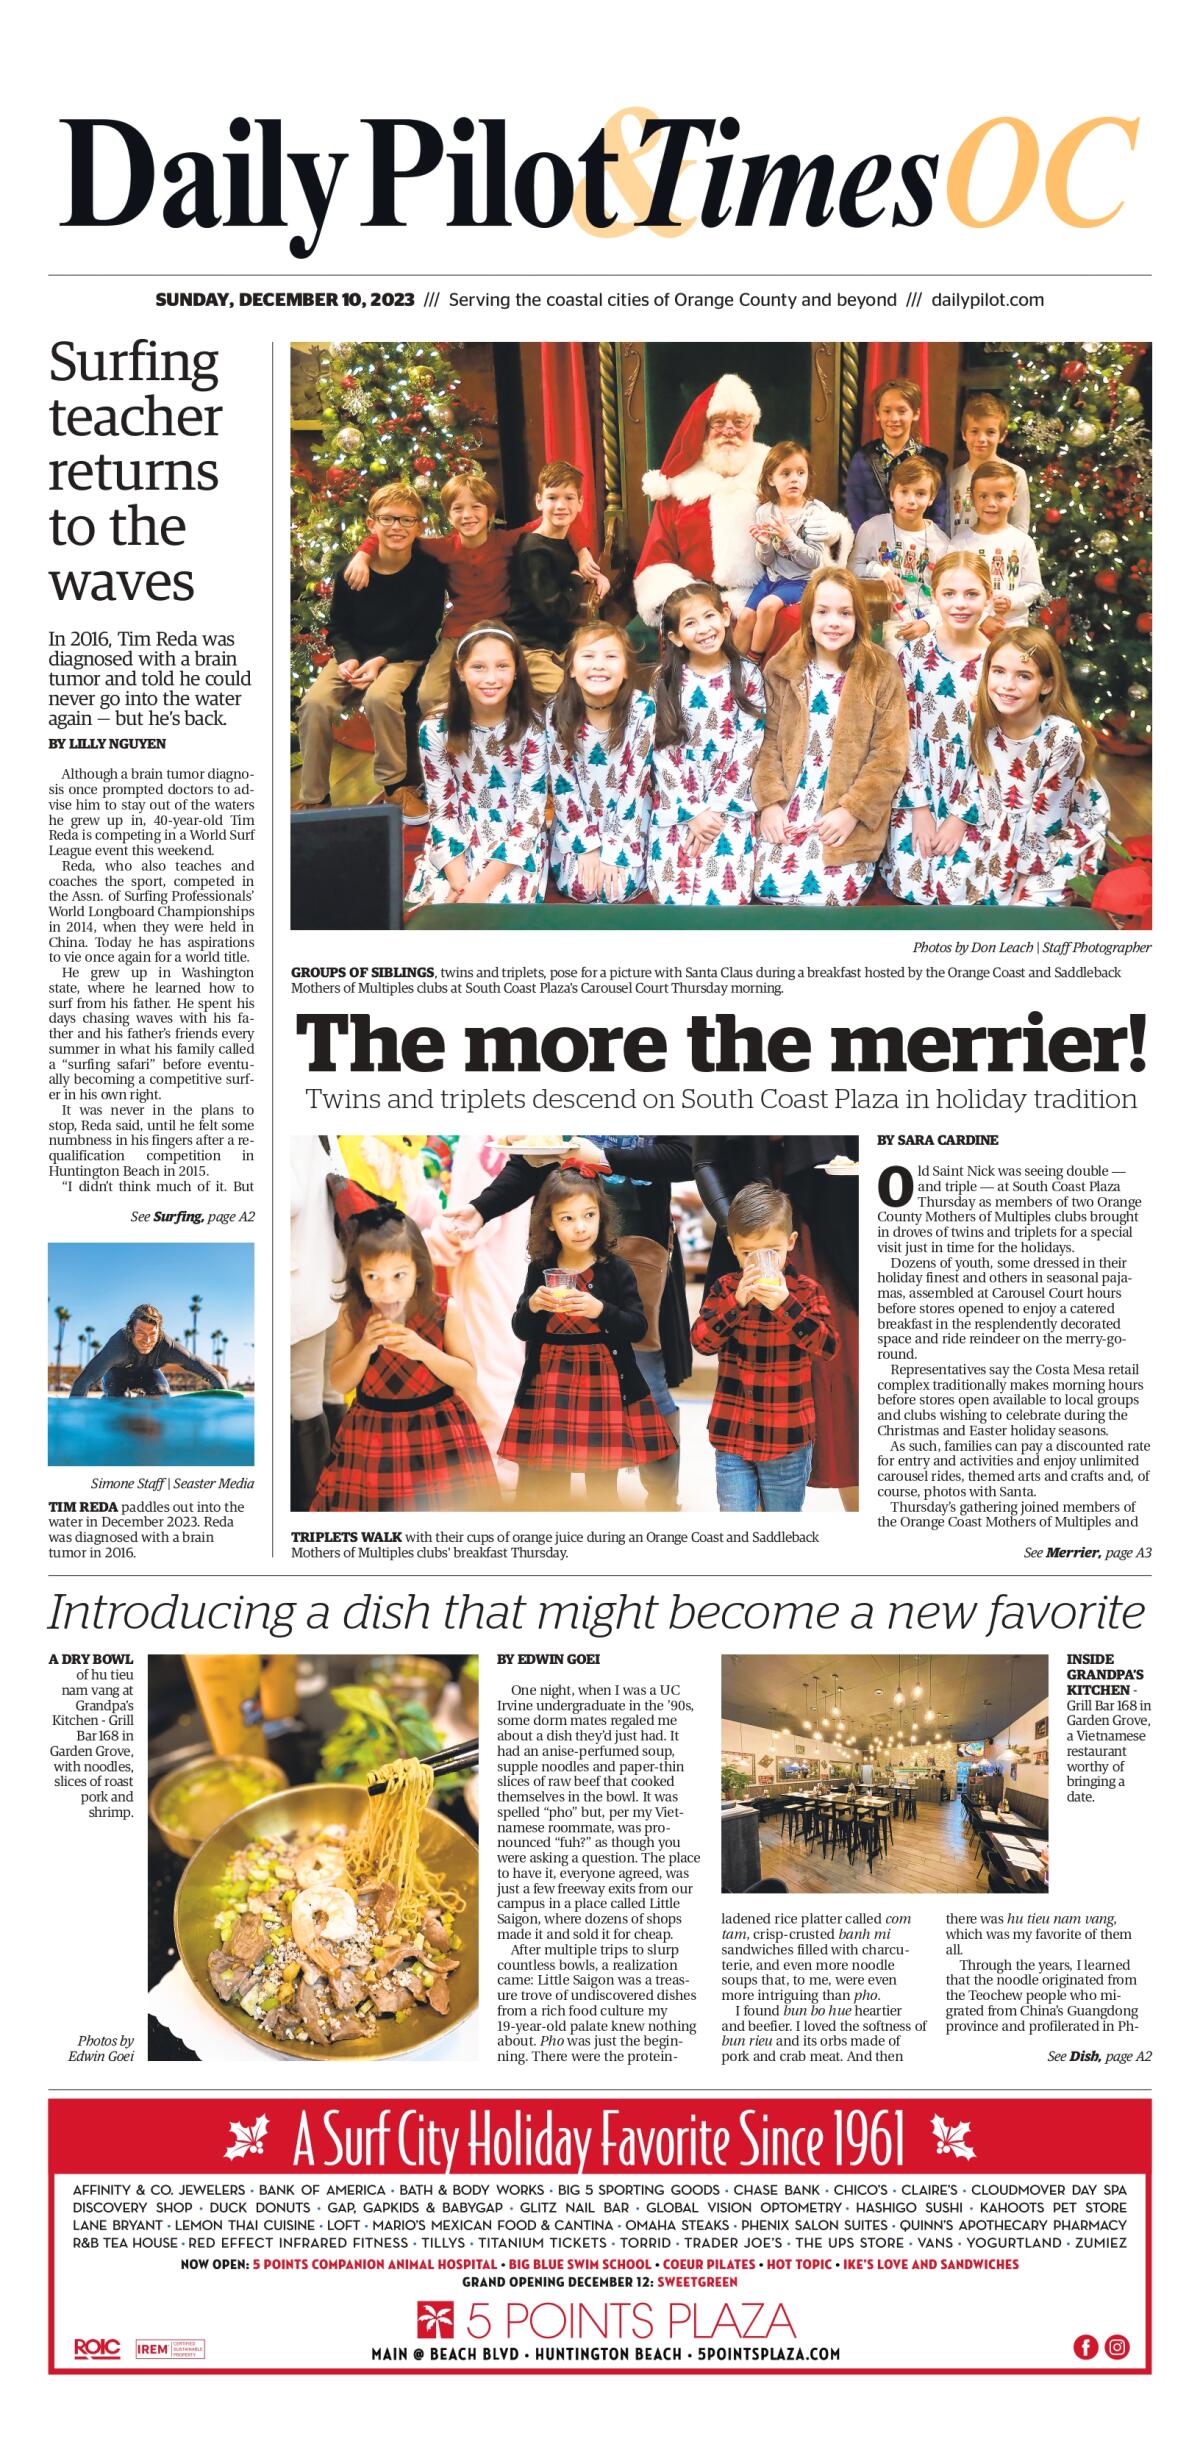 Front page of the Daily Pilot & TimesOC e-newspaper for Sunday, Dec. 10, 2023.